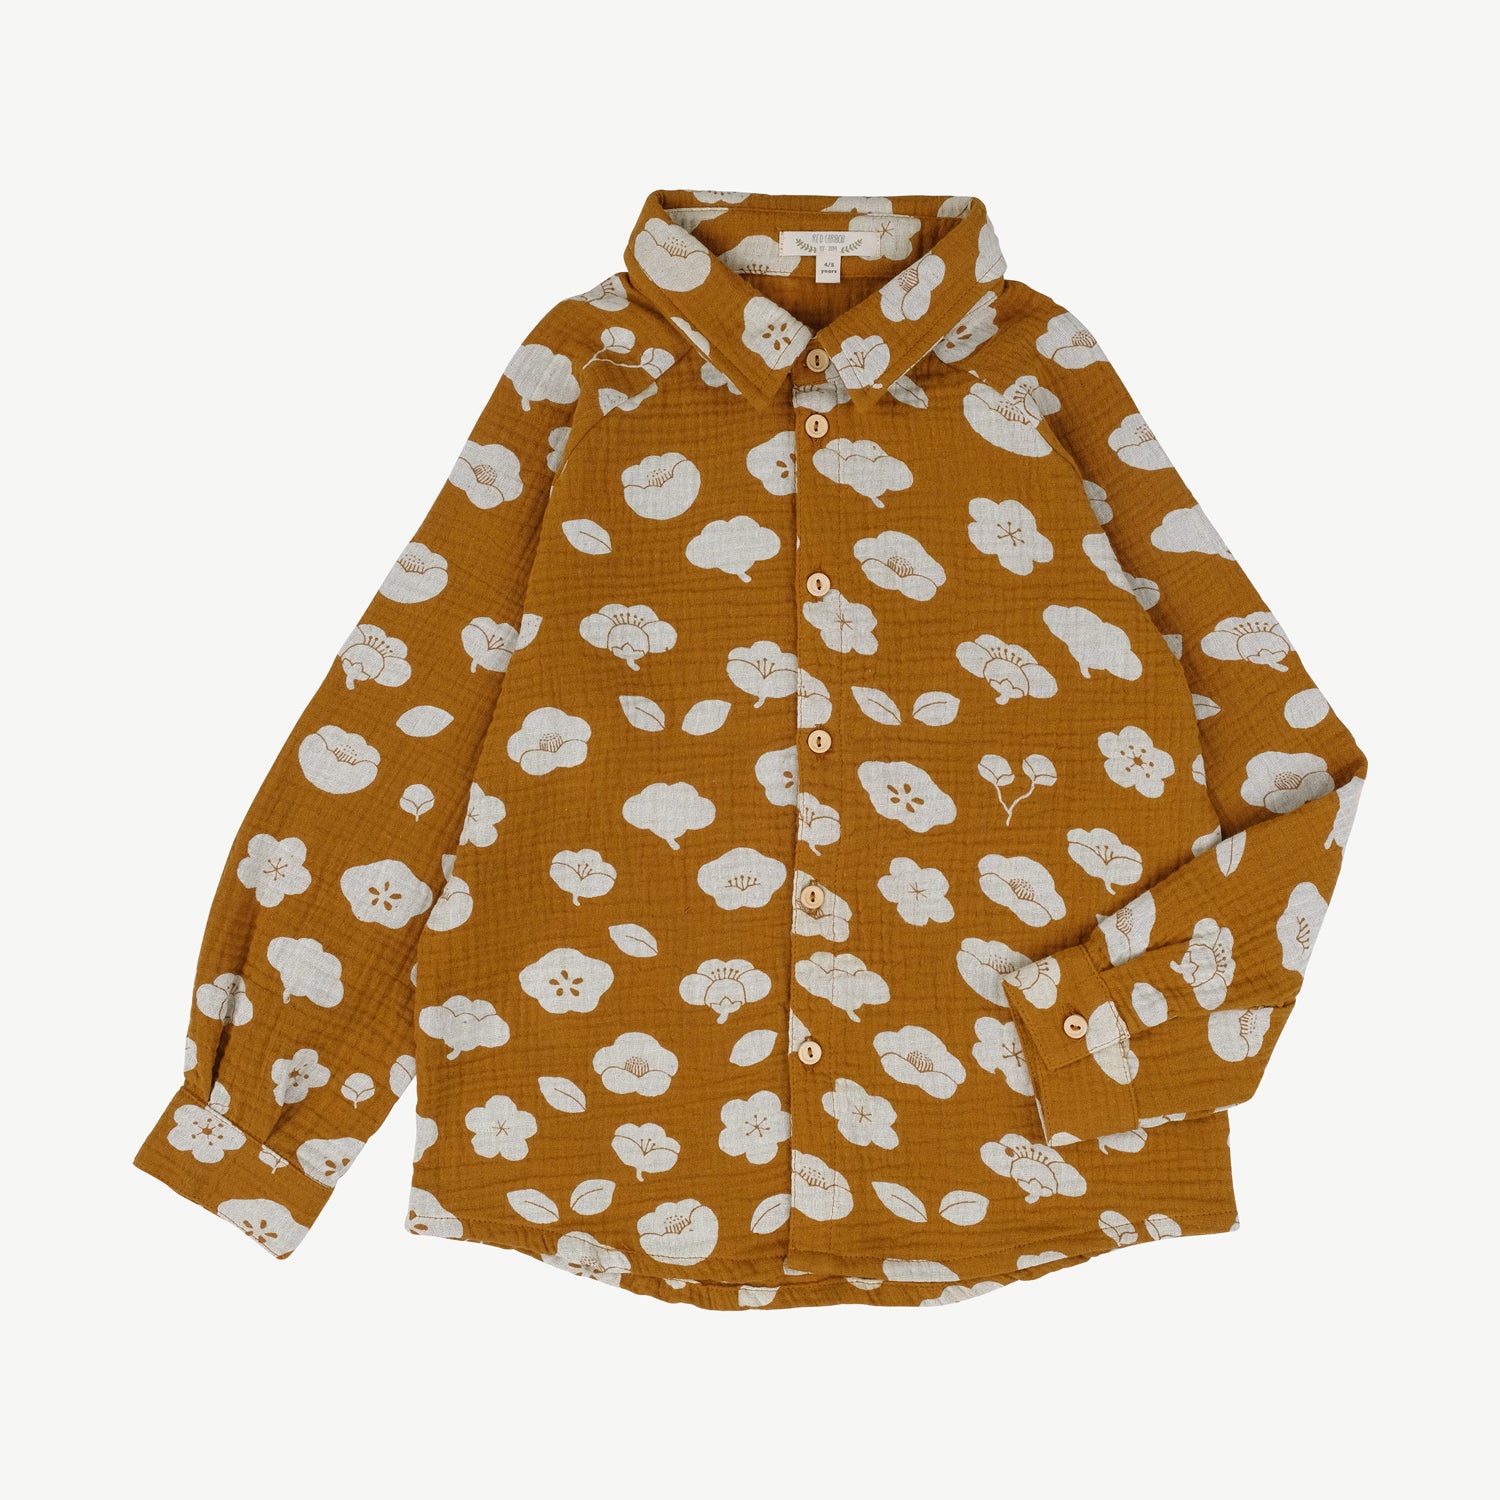 'plums in bloom' curry shirt